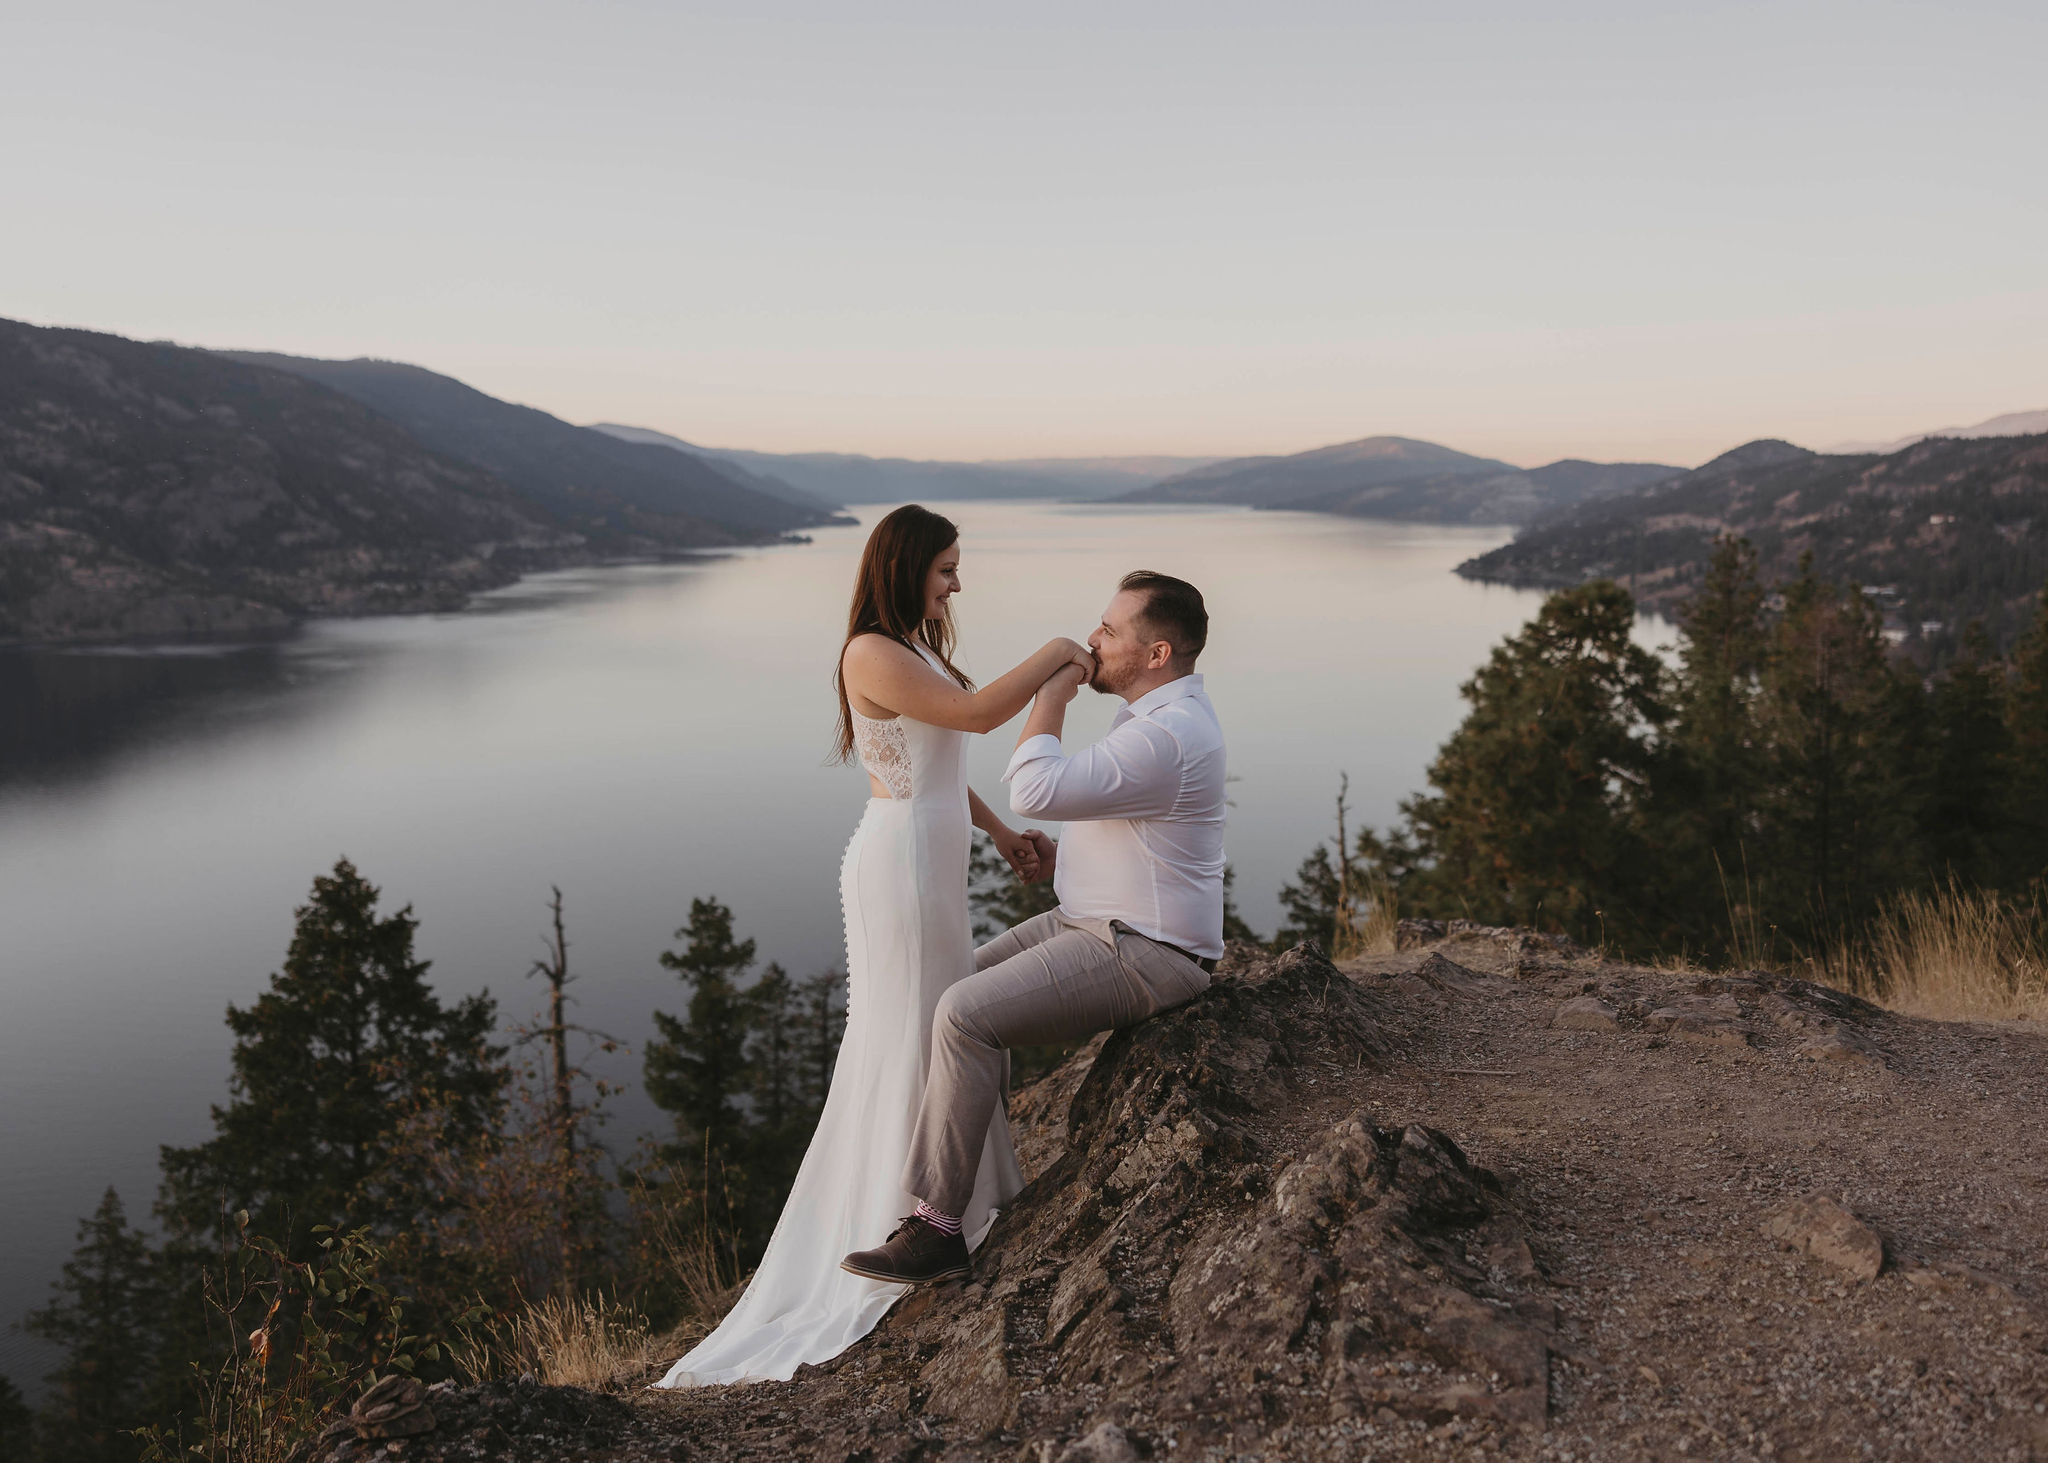 How to Hire a Destination Wedding Photographer in Canada